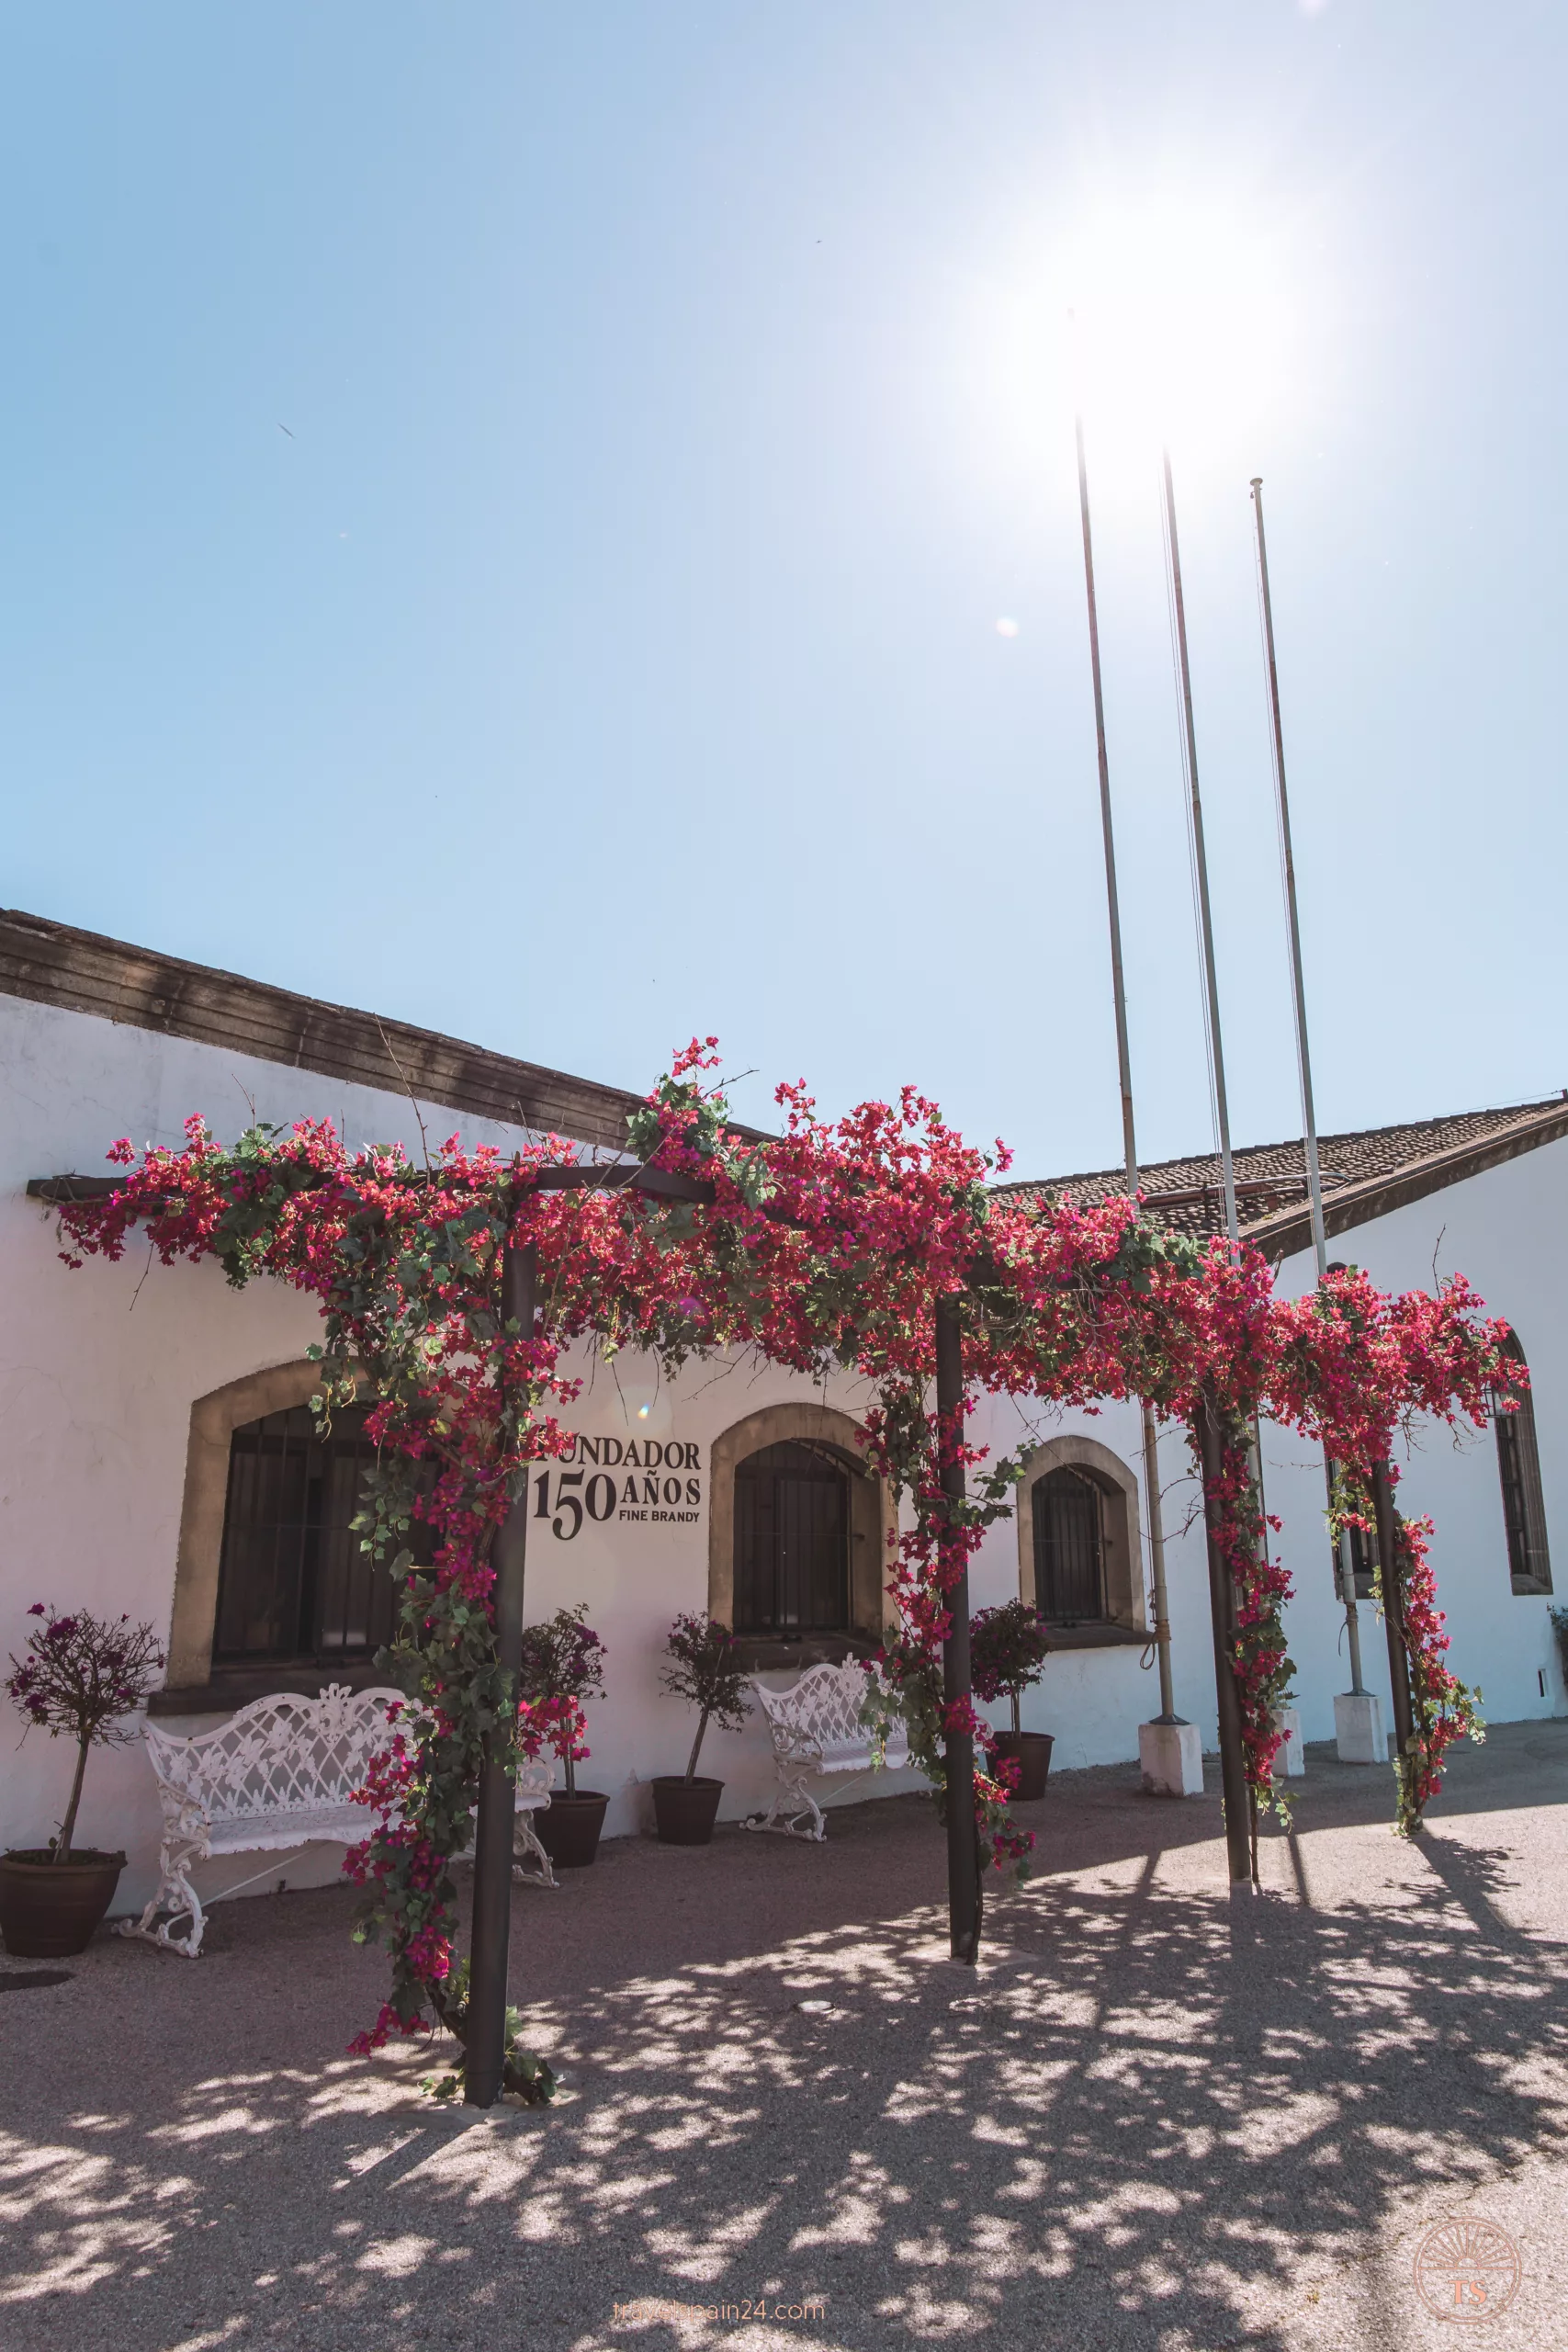 Entrance of Bodega Fundador in Jerez de la Frontera, featuring a pergola covered with climbing plants with pink flowers and white benches underneath. This image highlights the picturesque entrance of a famous bodega